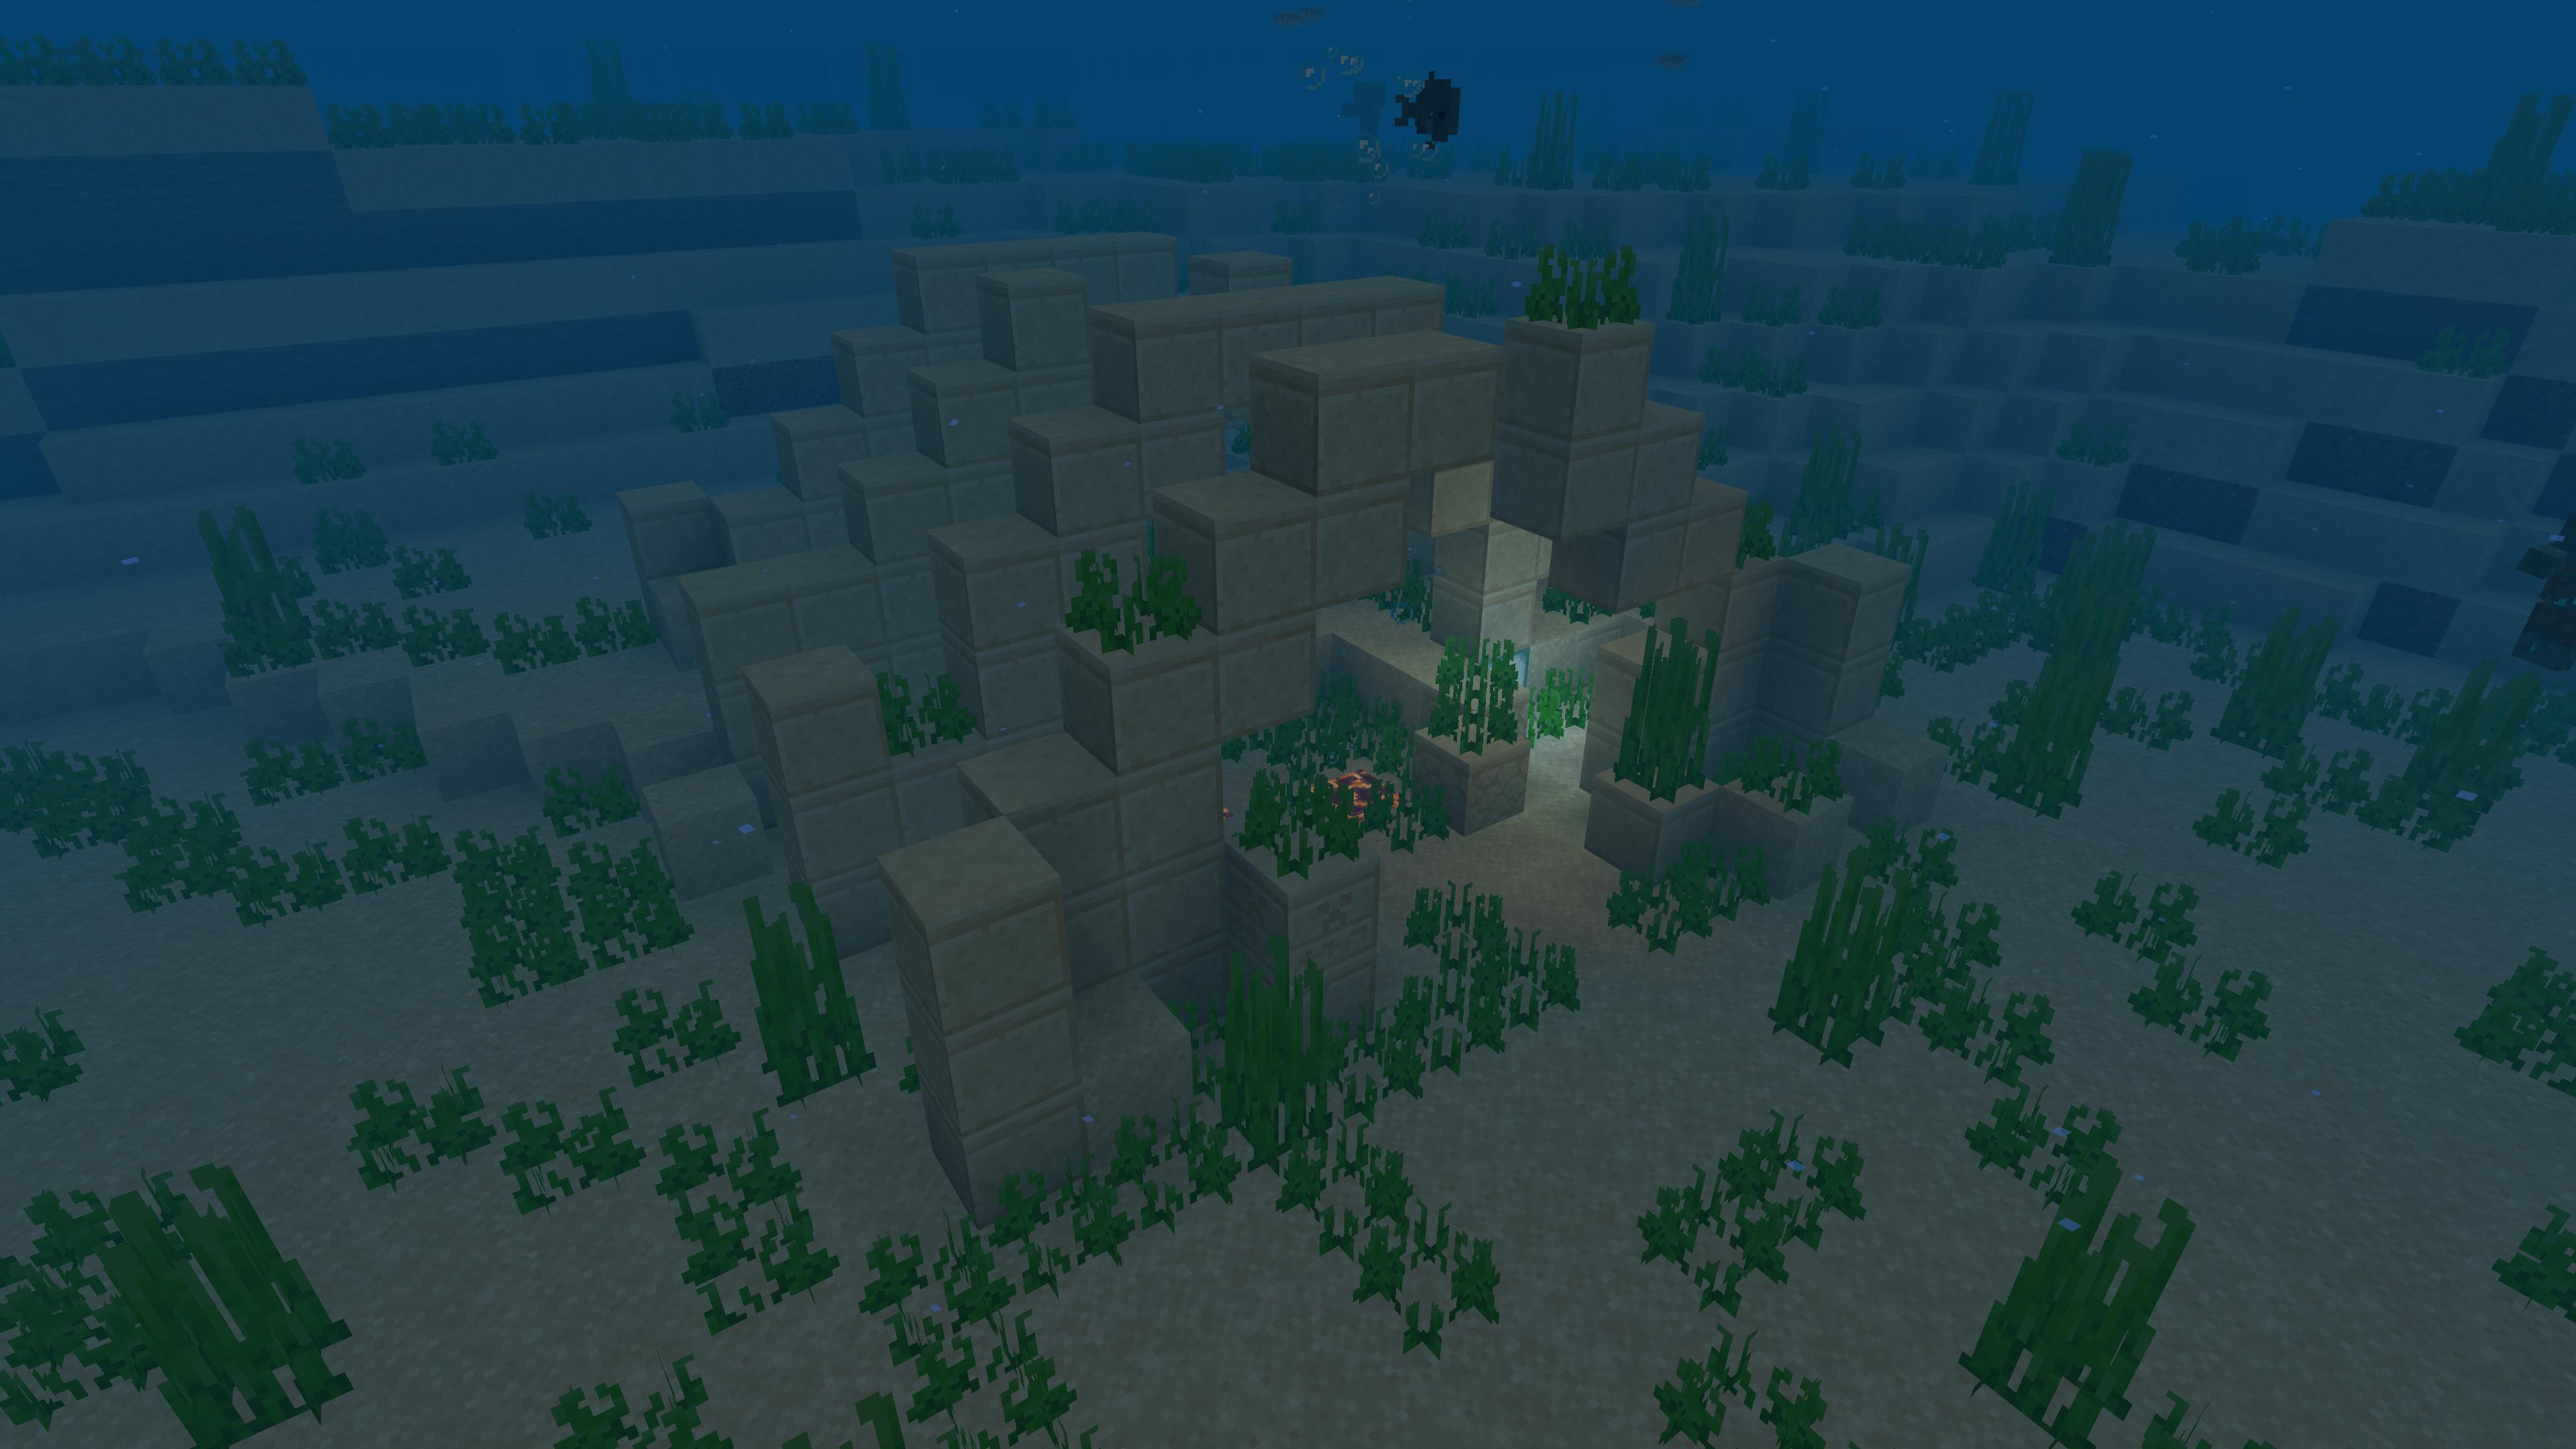 Warm Oceans Ruins, where Sniffer Eggs can be found inside Suspicious Sand blocks.